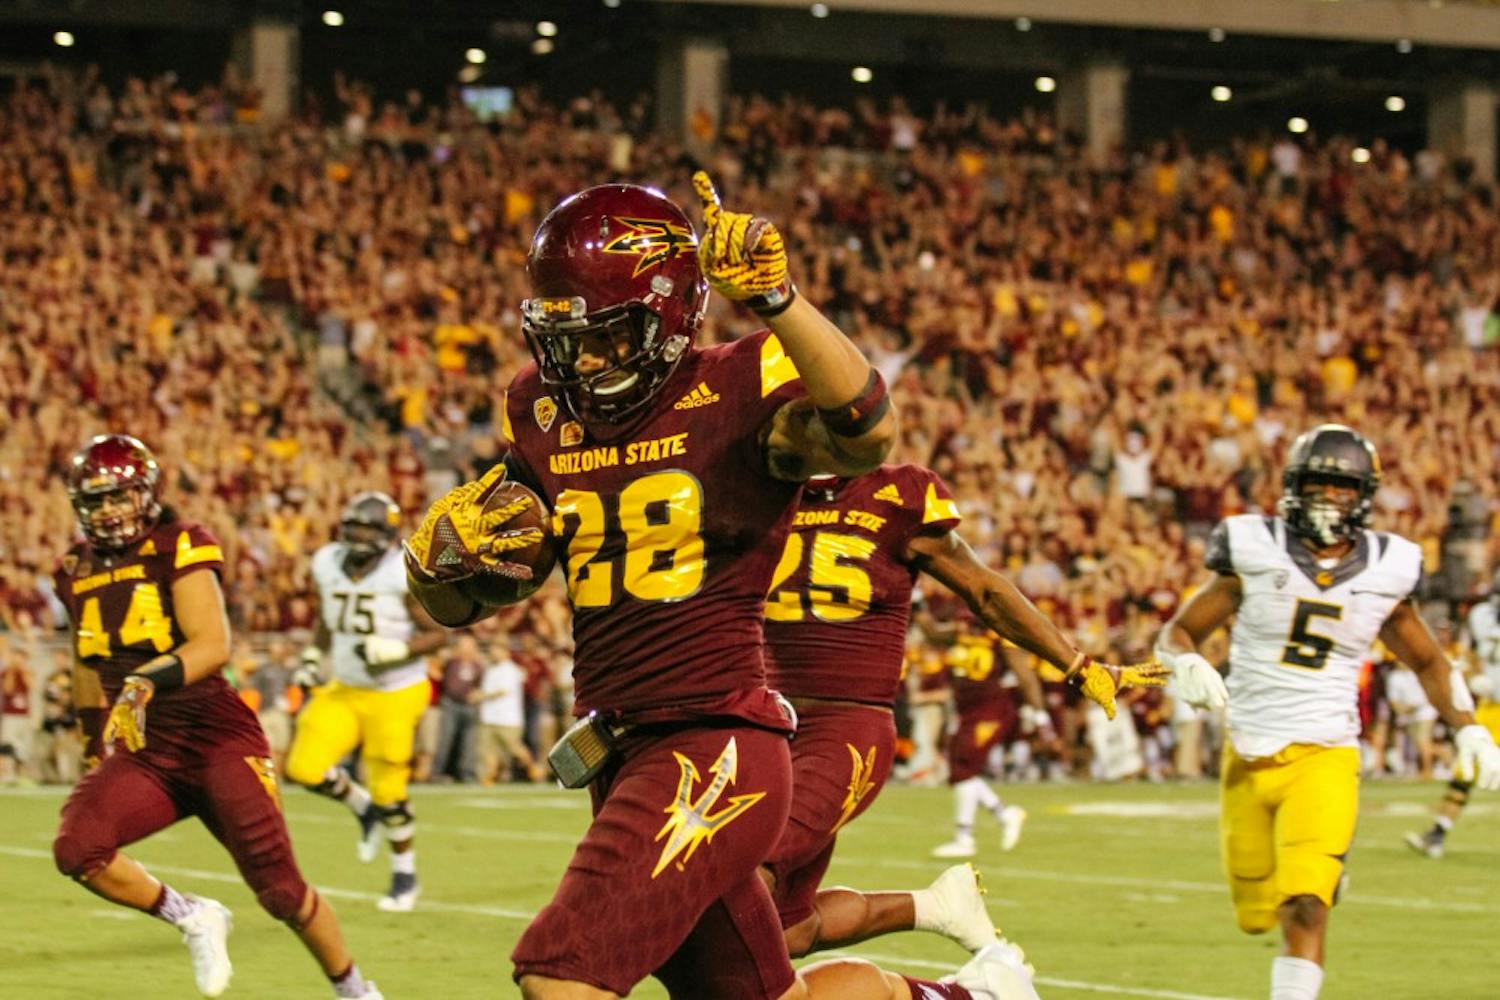 Defensive back, Viliami "Laiu" Moeakiola (28), picks pass and runs for a touchdown during the football game versus the California Golden Bears in Tempe, Arizona, on Saturday, Sept. 24, 2016.